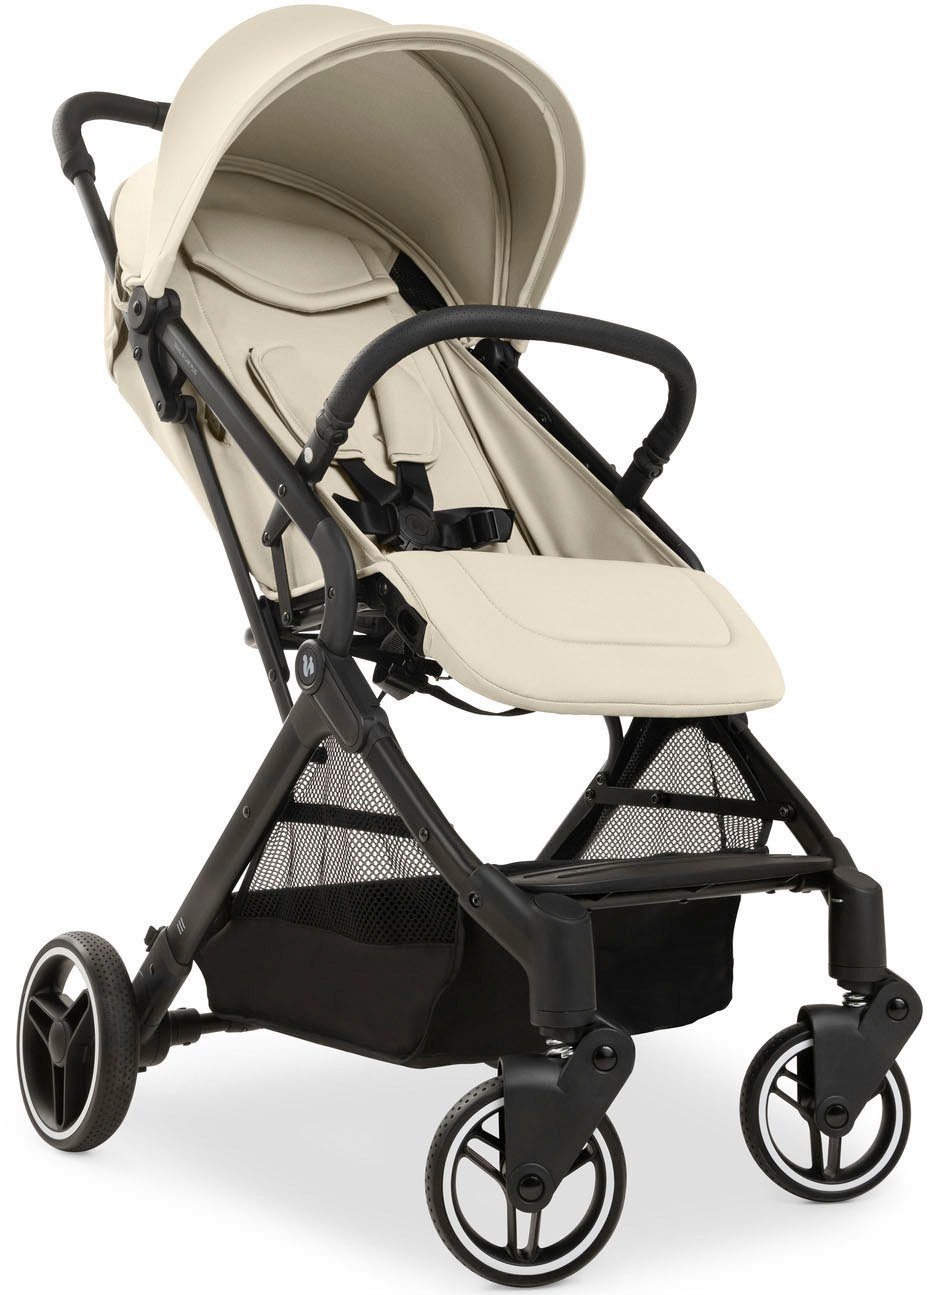 Hauck N Kinder-Buggy Care Travel Plus vanilla Buggy,